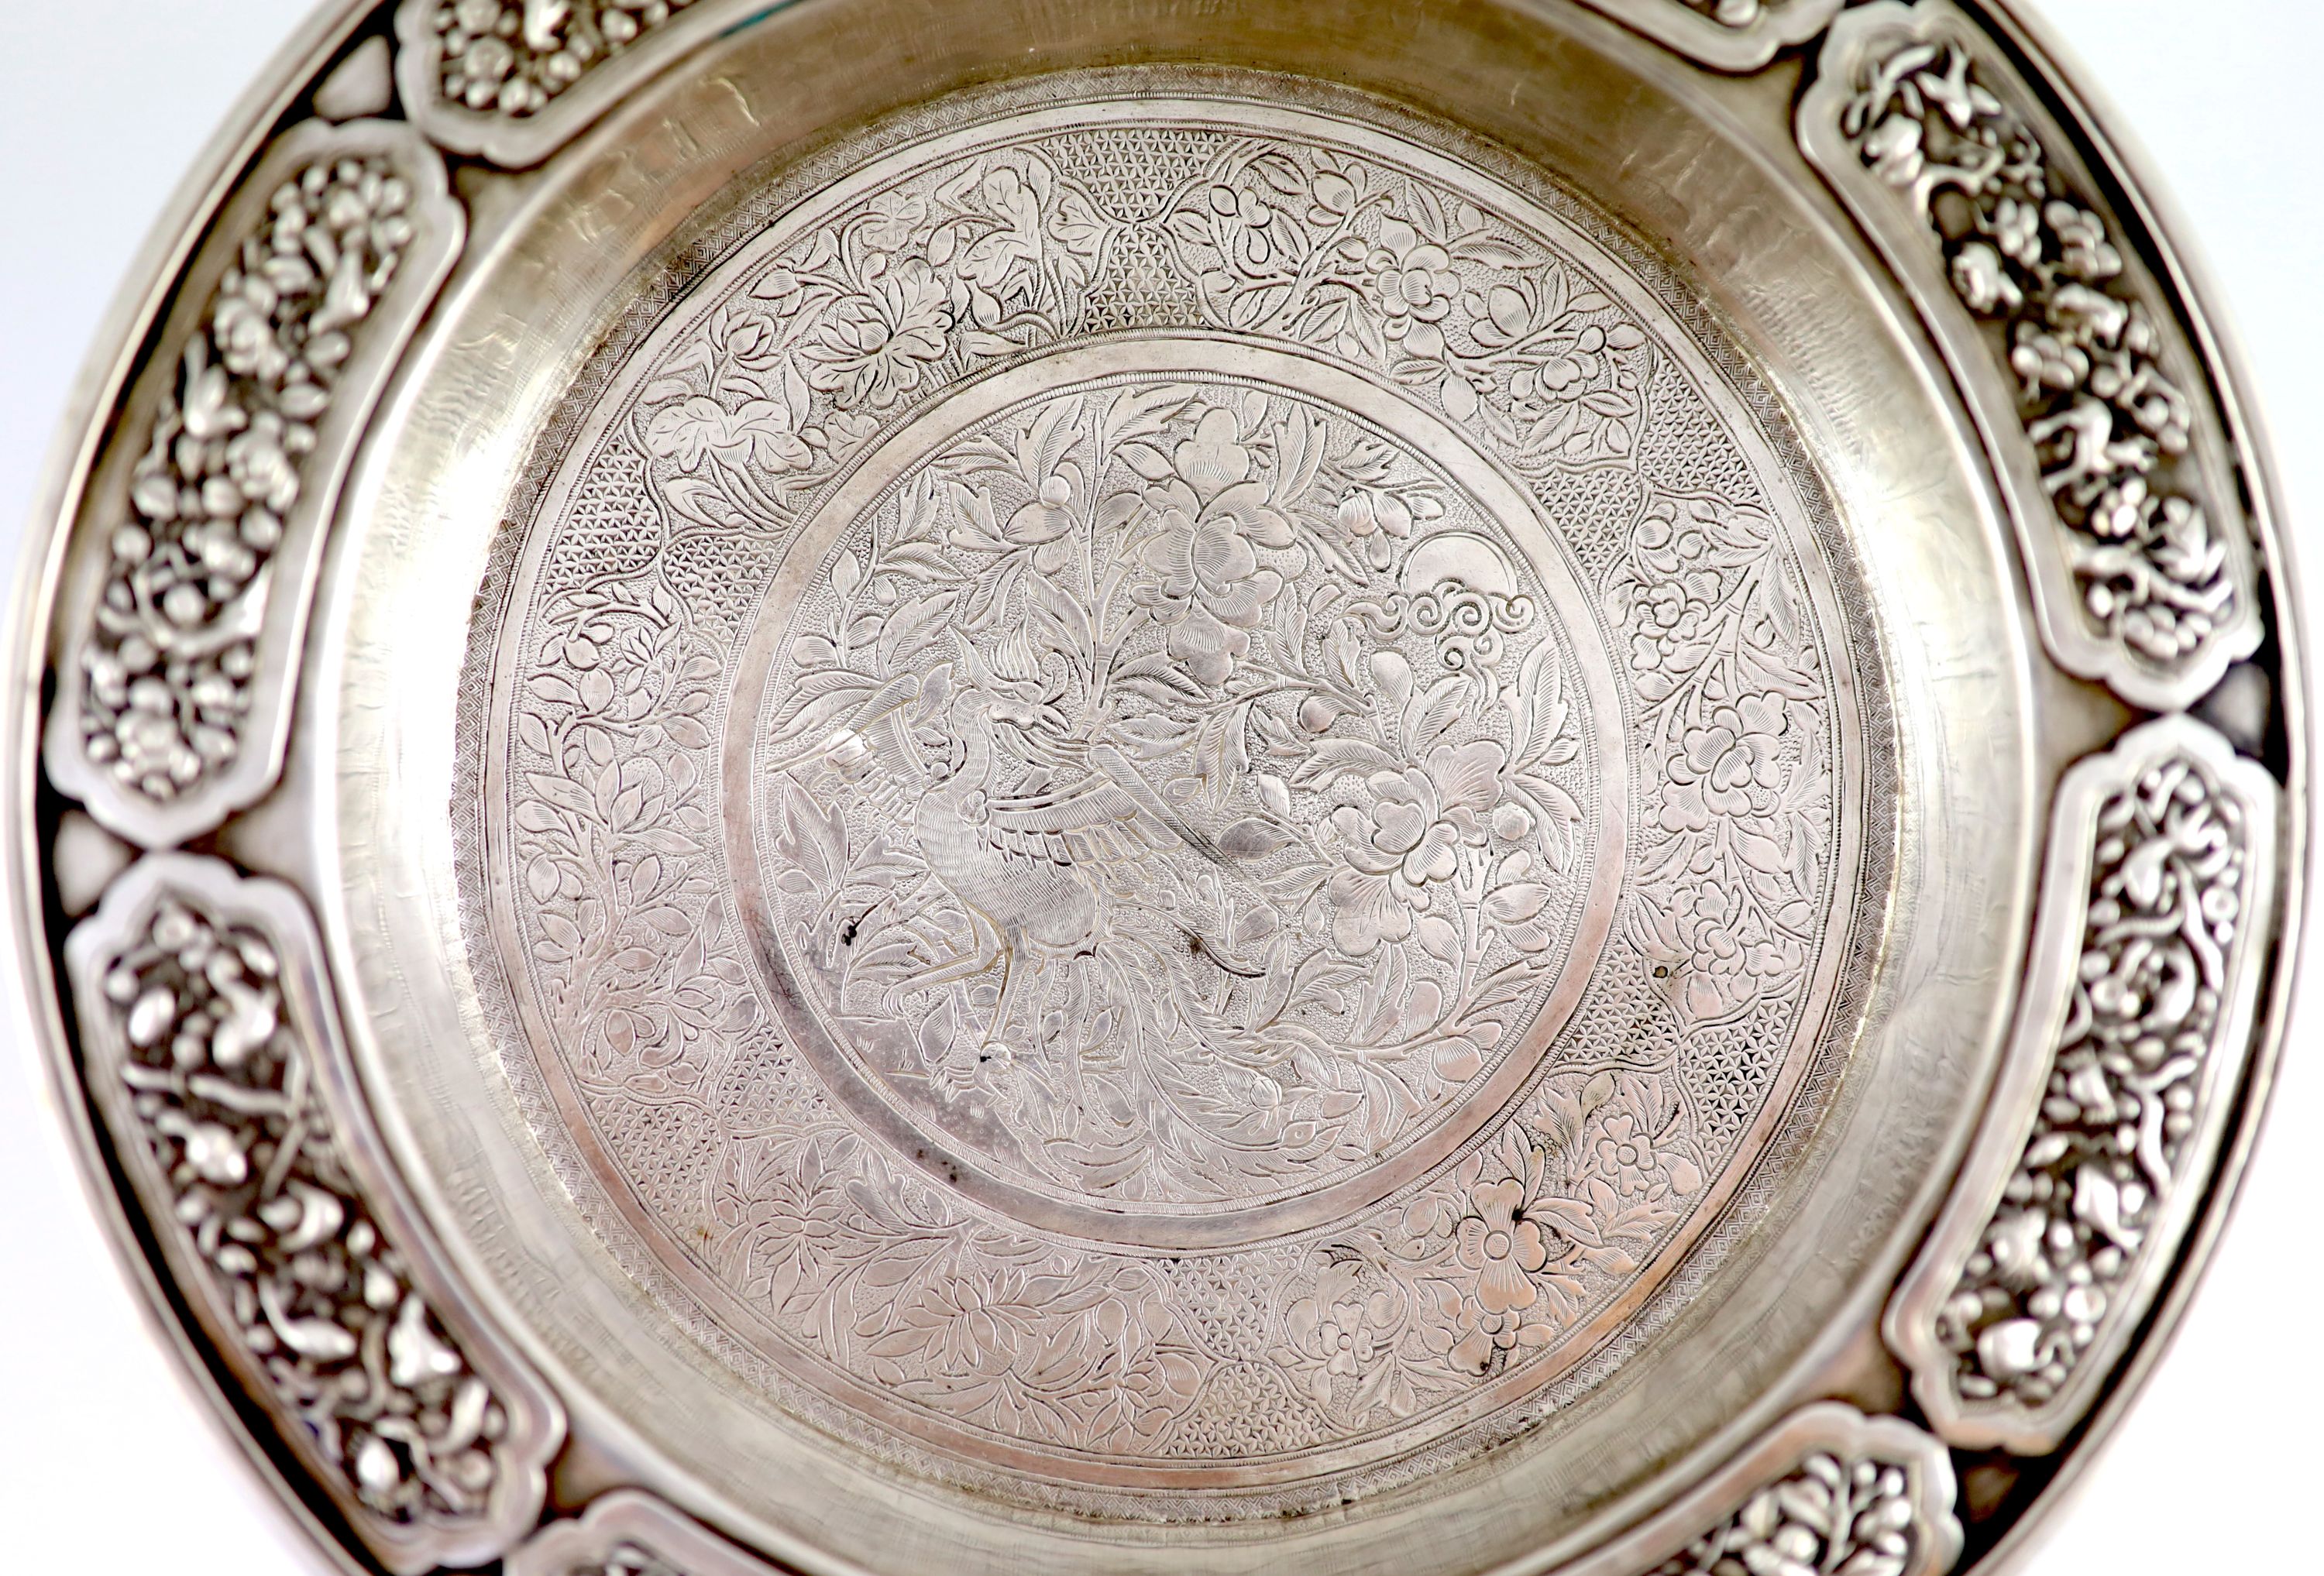 A late 19th/early 20th century South East Asian silver pedestal bowl